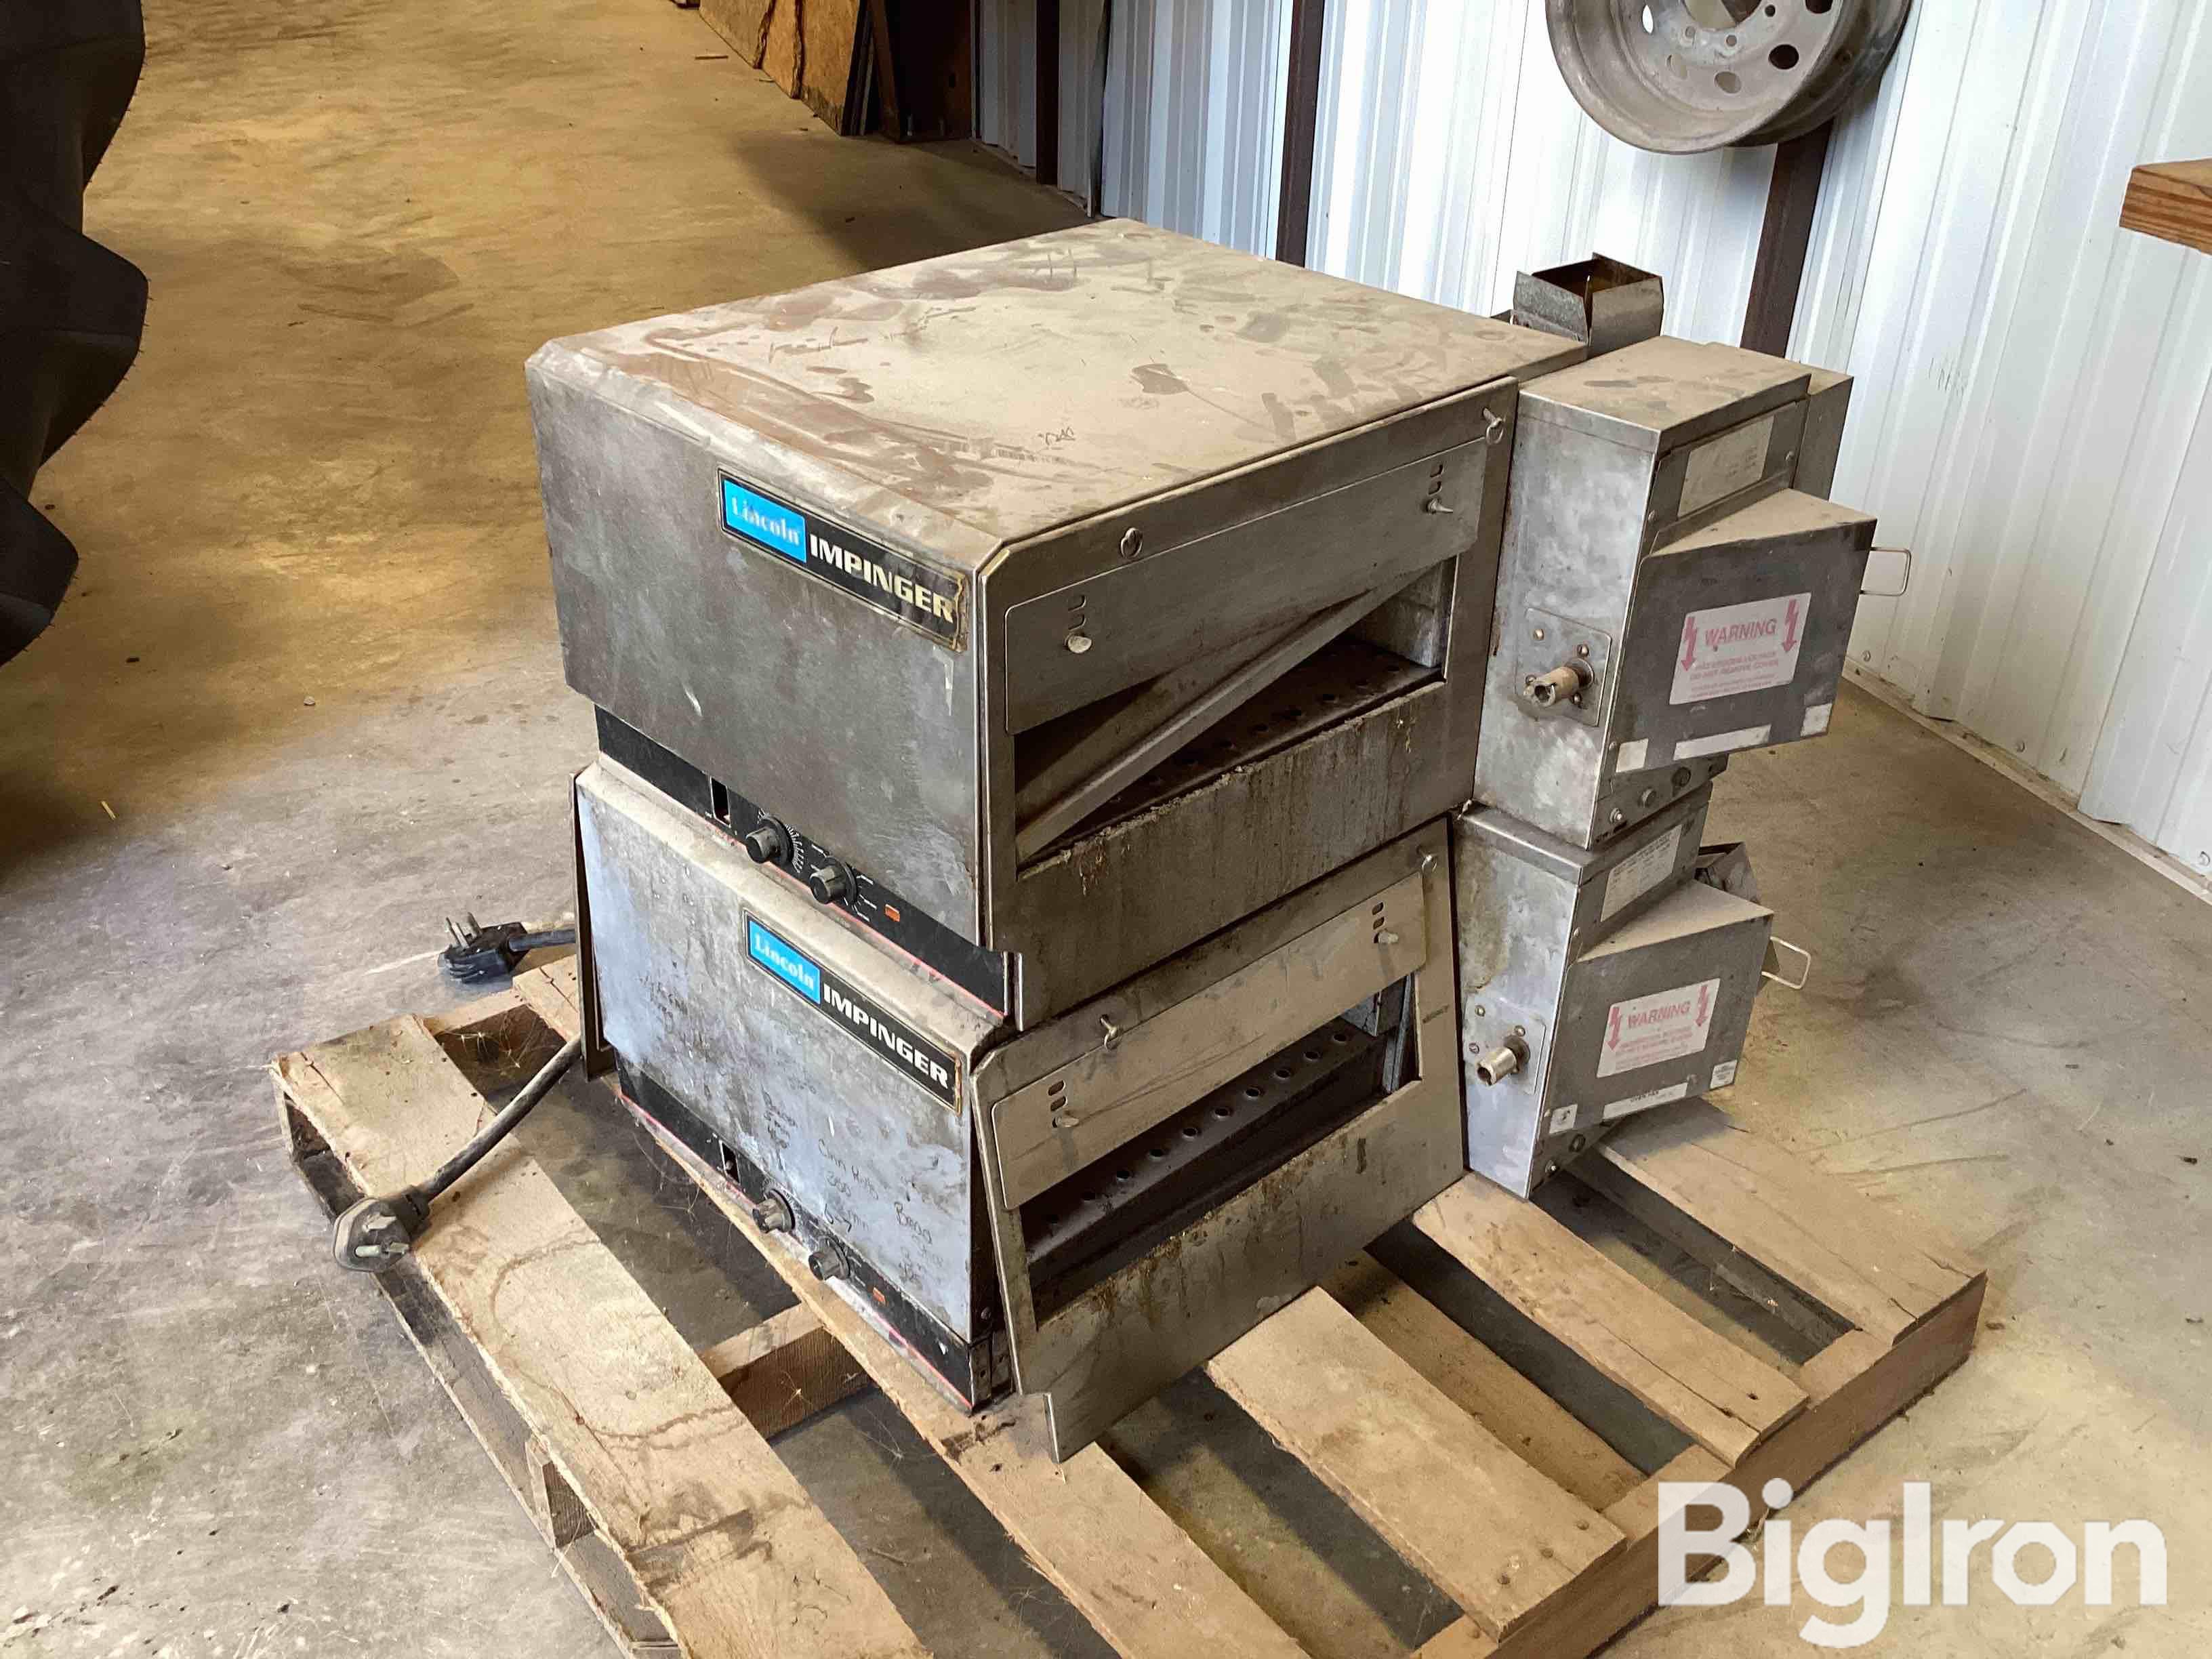 Pizza Ovens for sale in Kansas City, Missouri, Facebook Marketplace